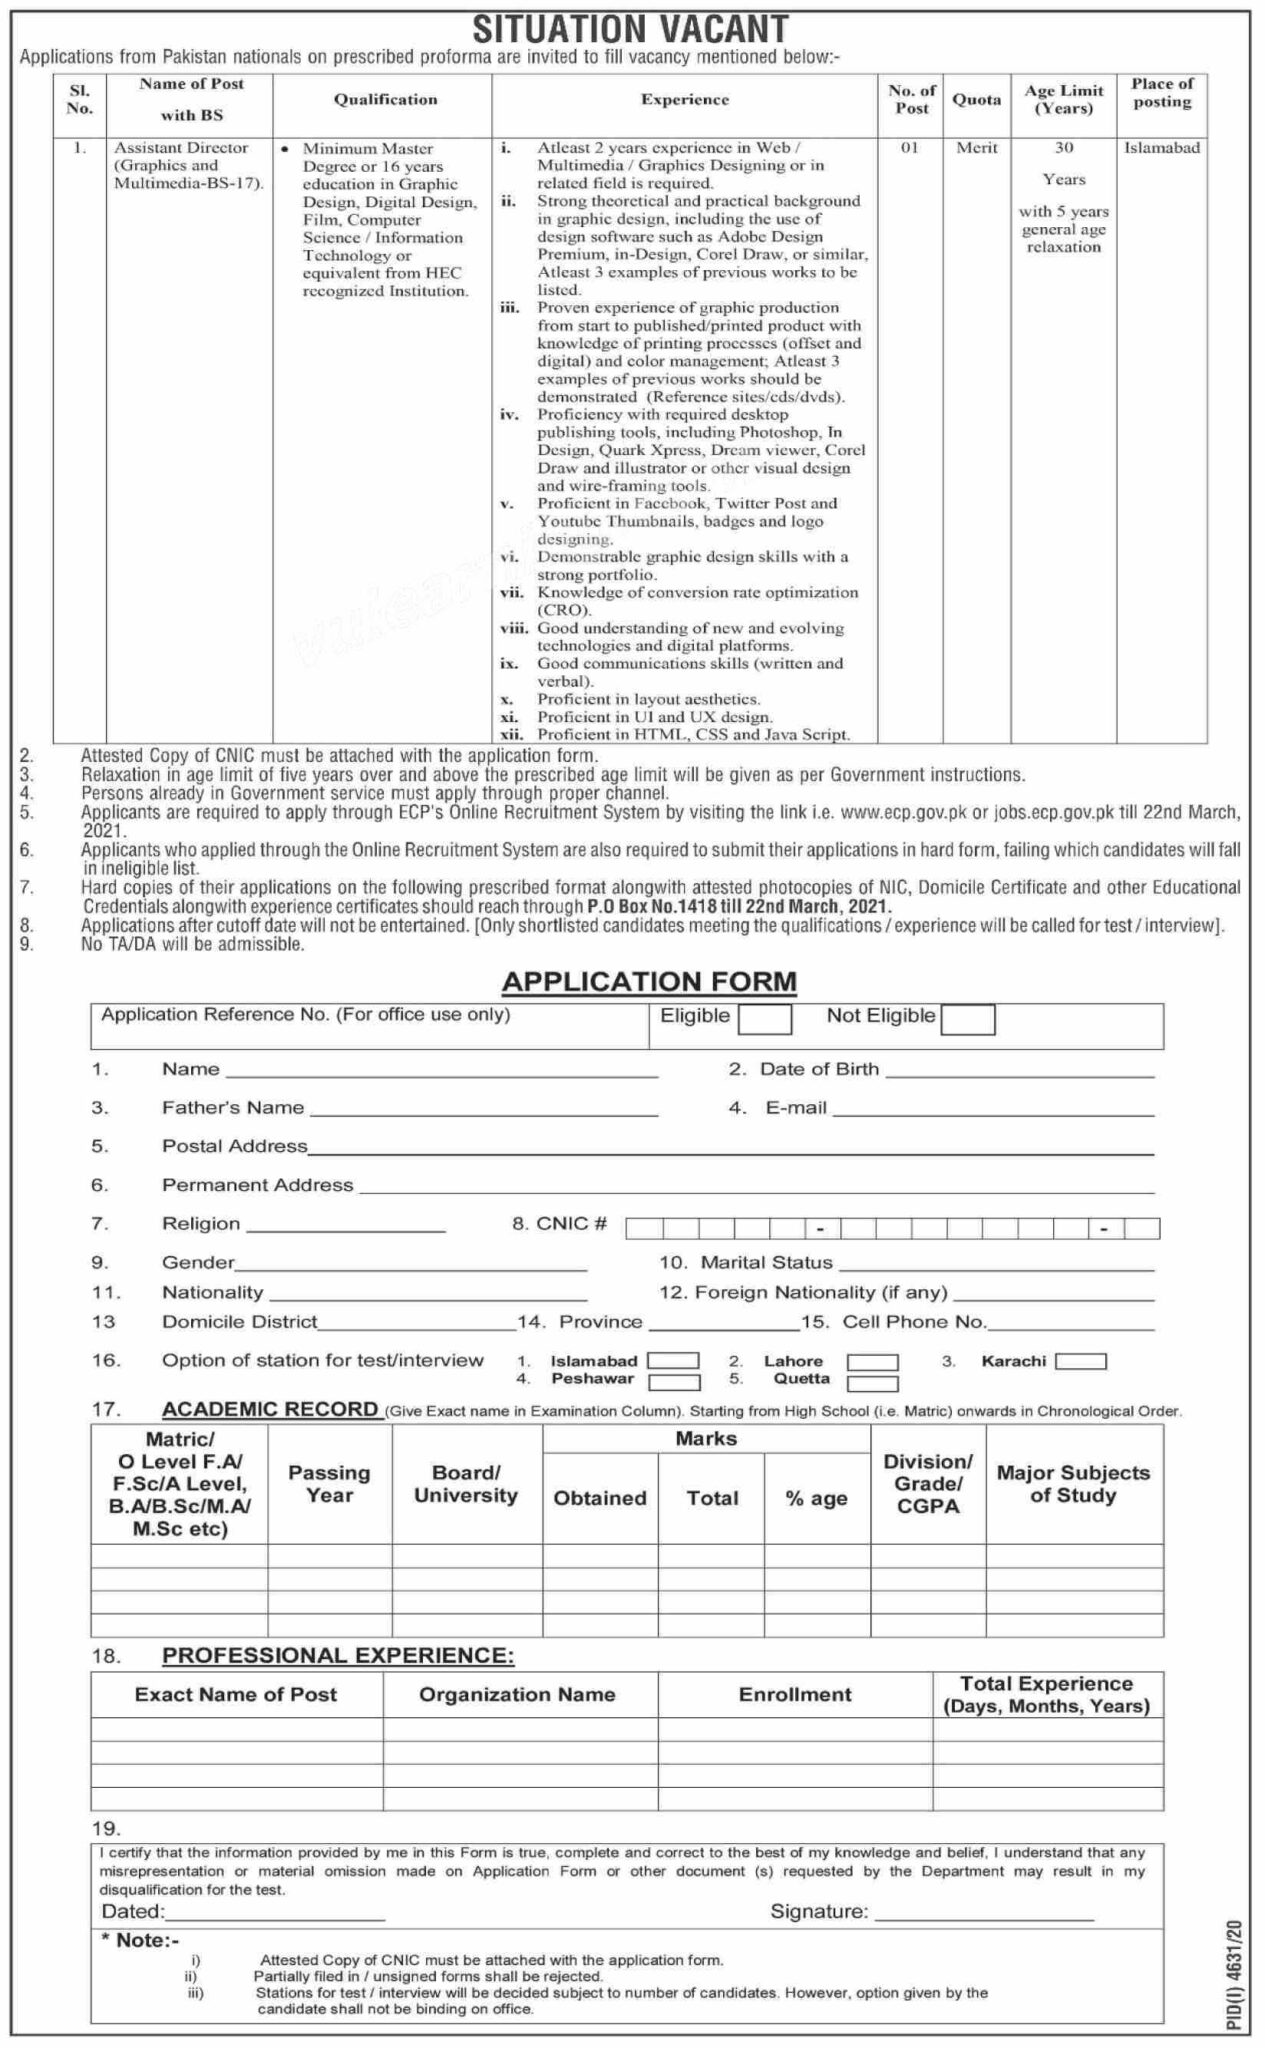 Election commission of pakistan islamabad jobs